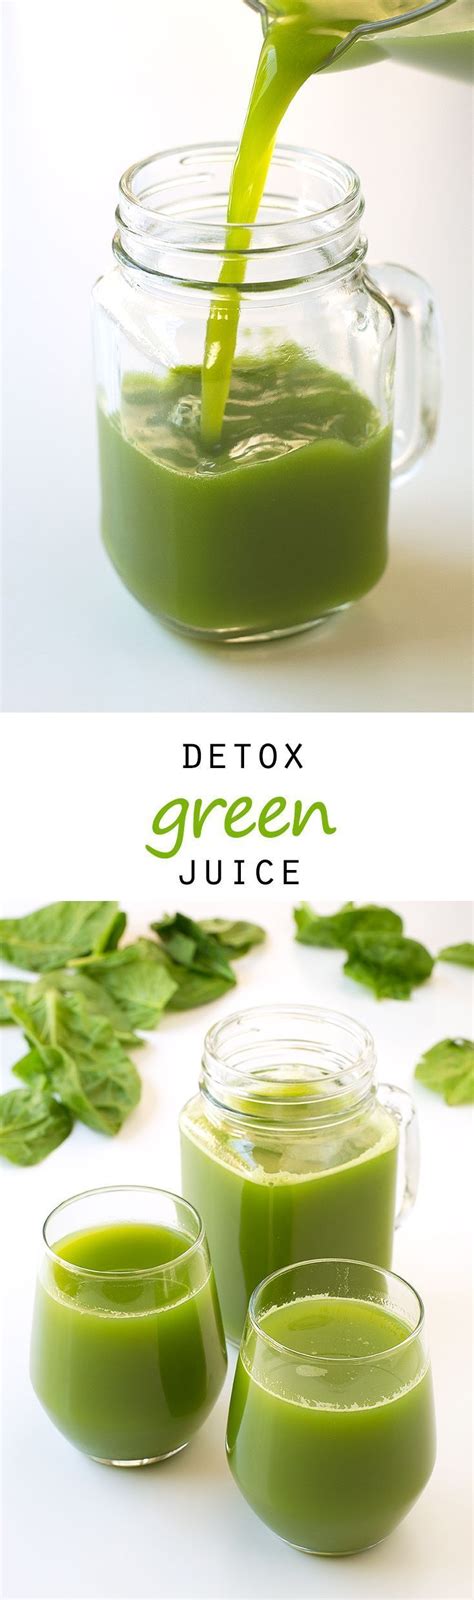 Healthier recipes, from the food and nutrition experts at eatingwell. Detox Green Juice | Recipe | Healthy detox